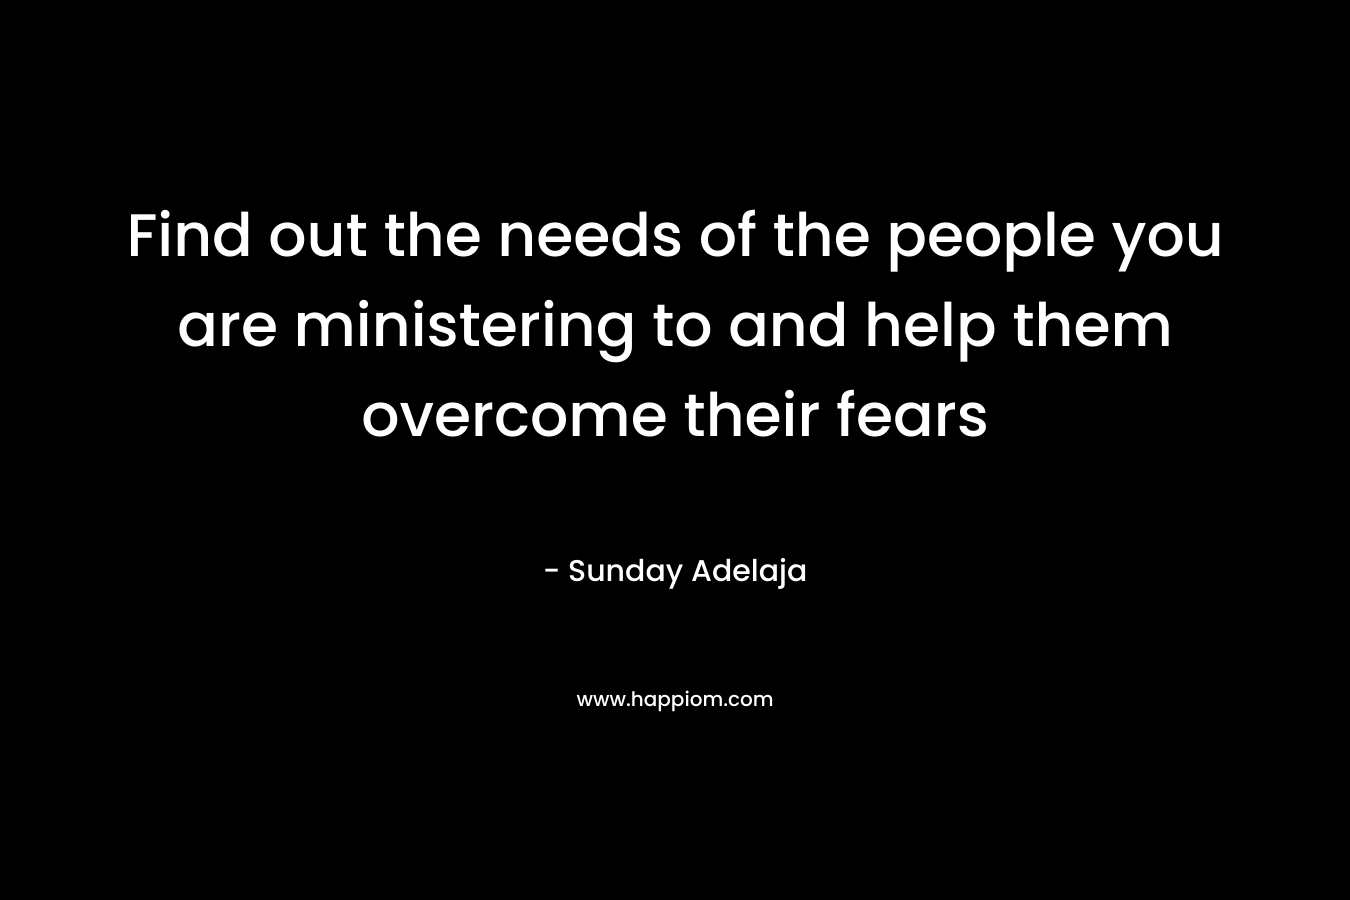 Find out the needs of the people you are ministering to and help them overcome their fears